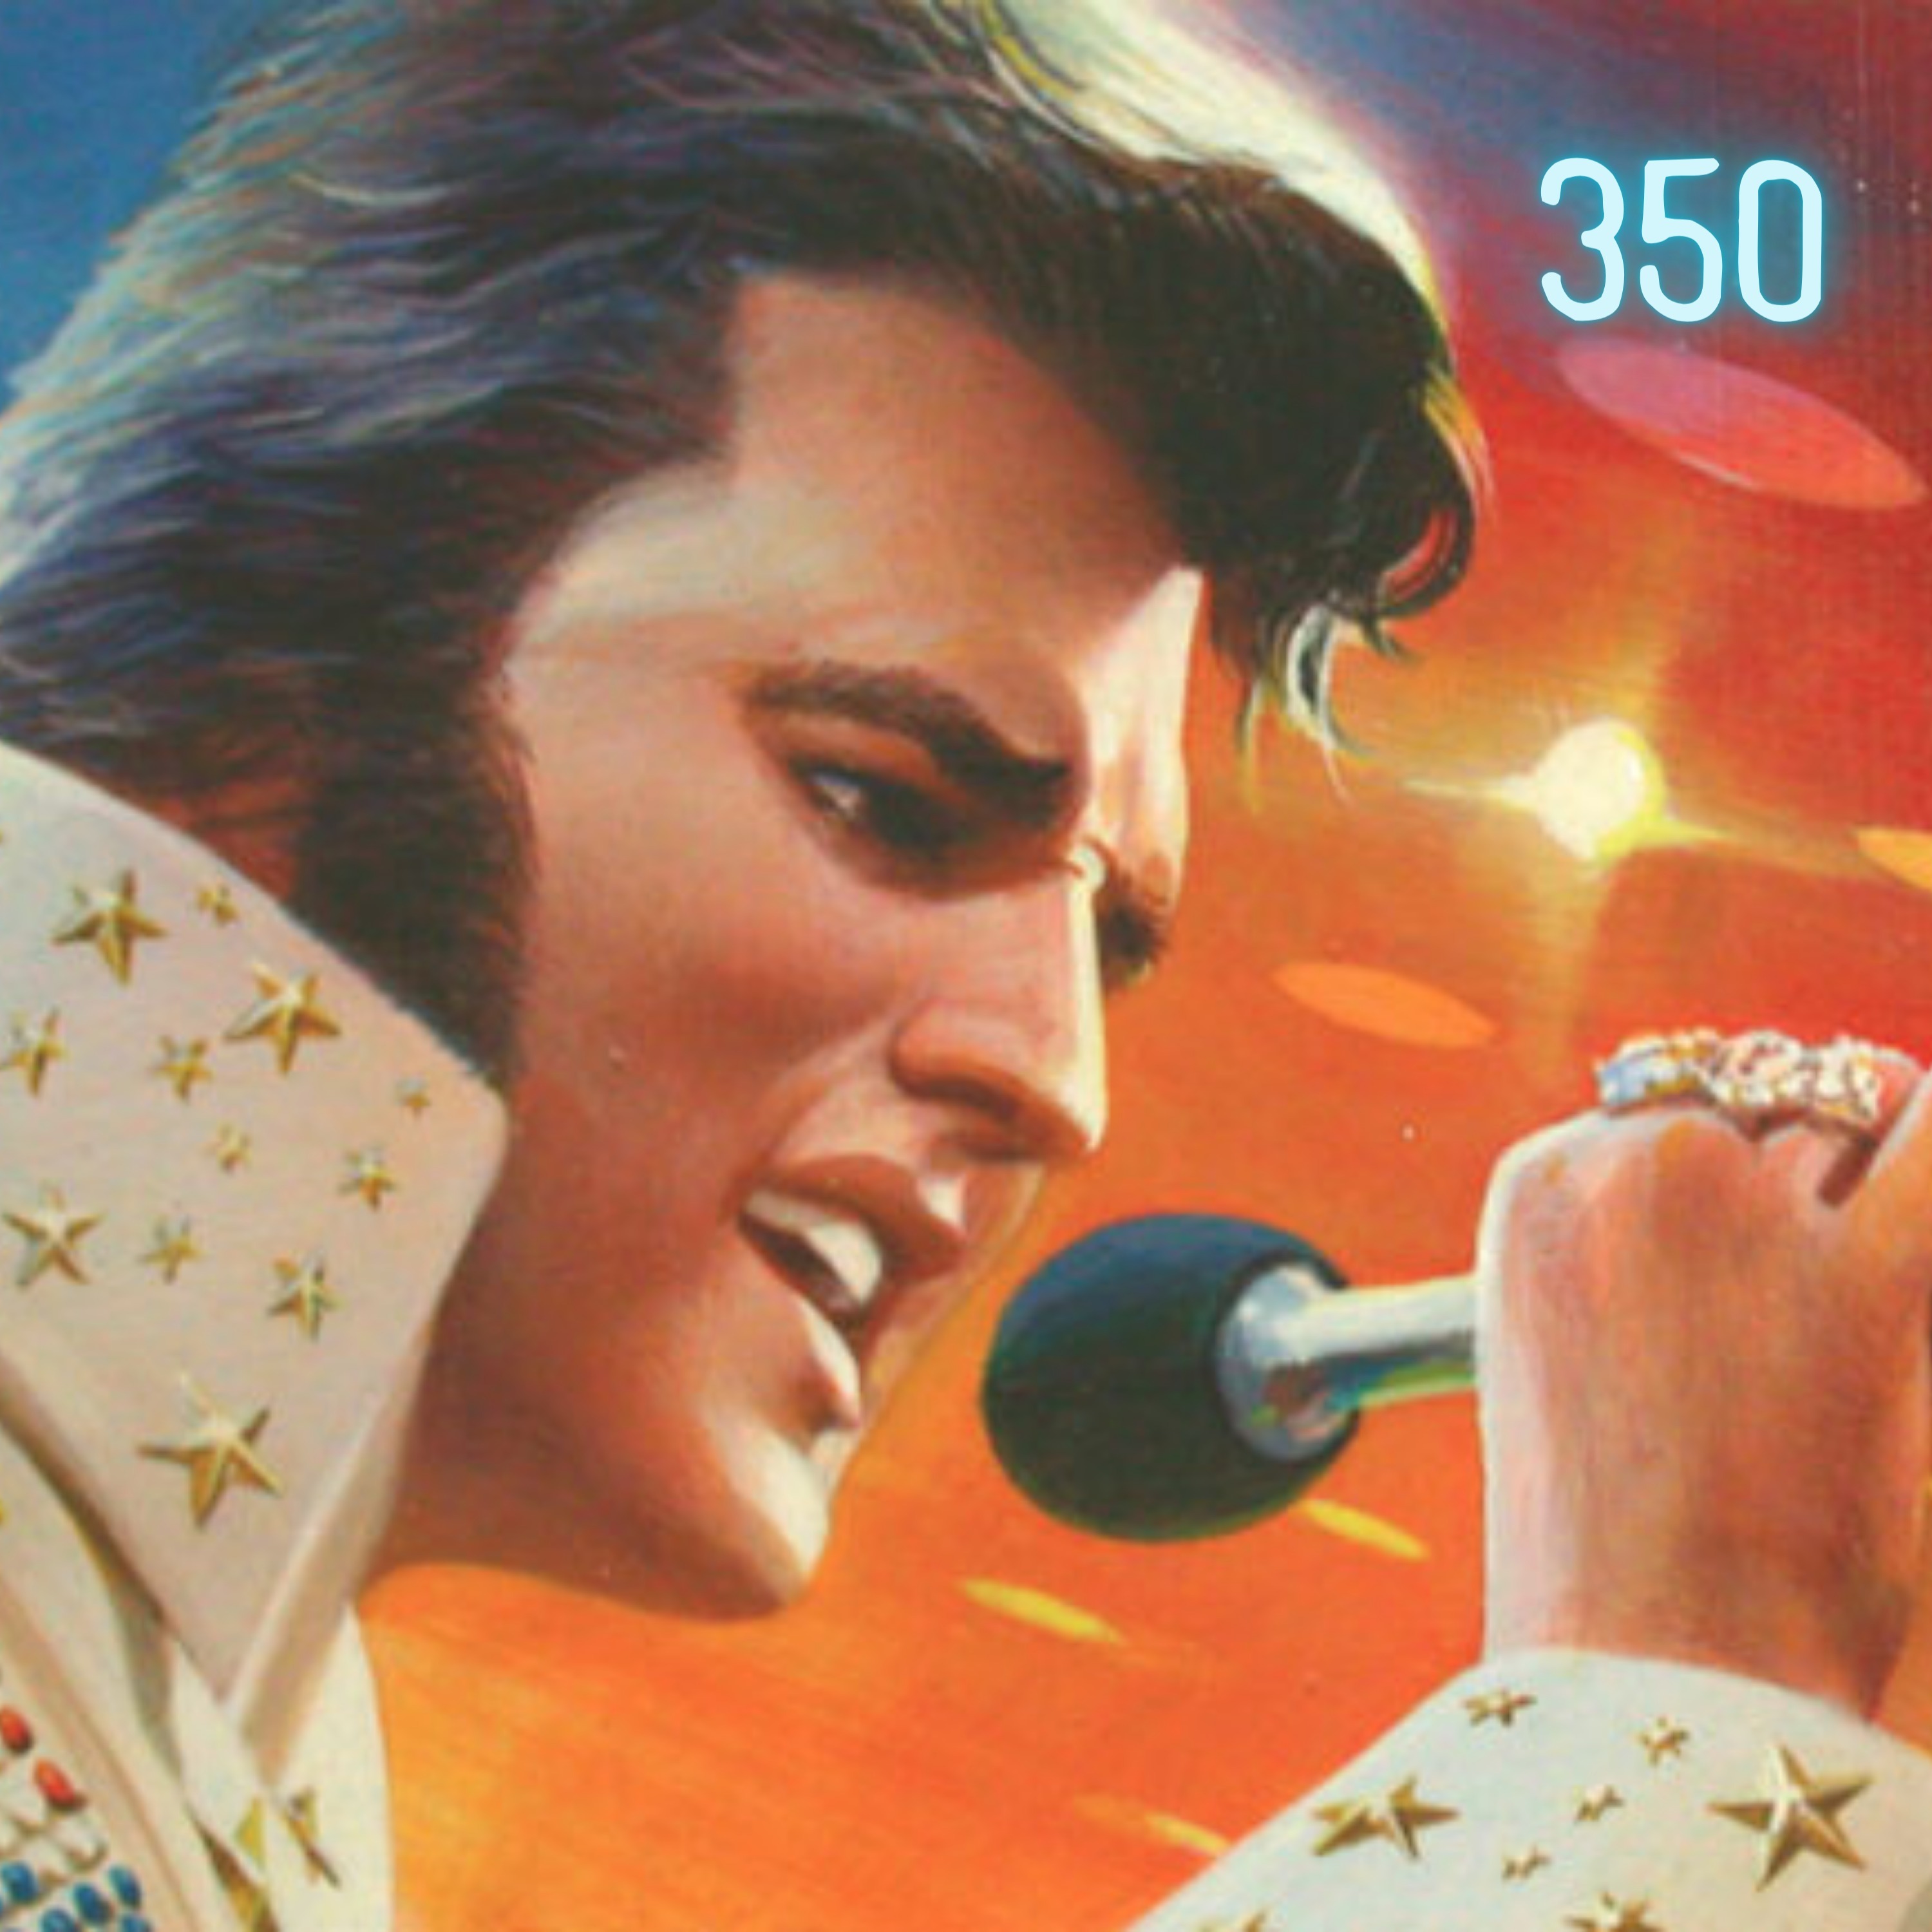 Miguel Conner | Esoteric Elvis Presley, The Alien King of Rock and Roll, and The King's Death Ritual